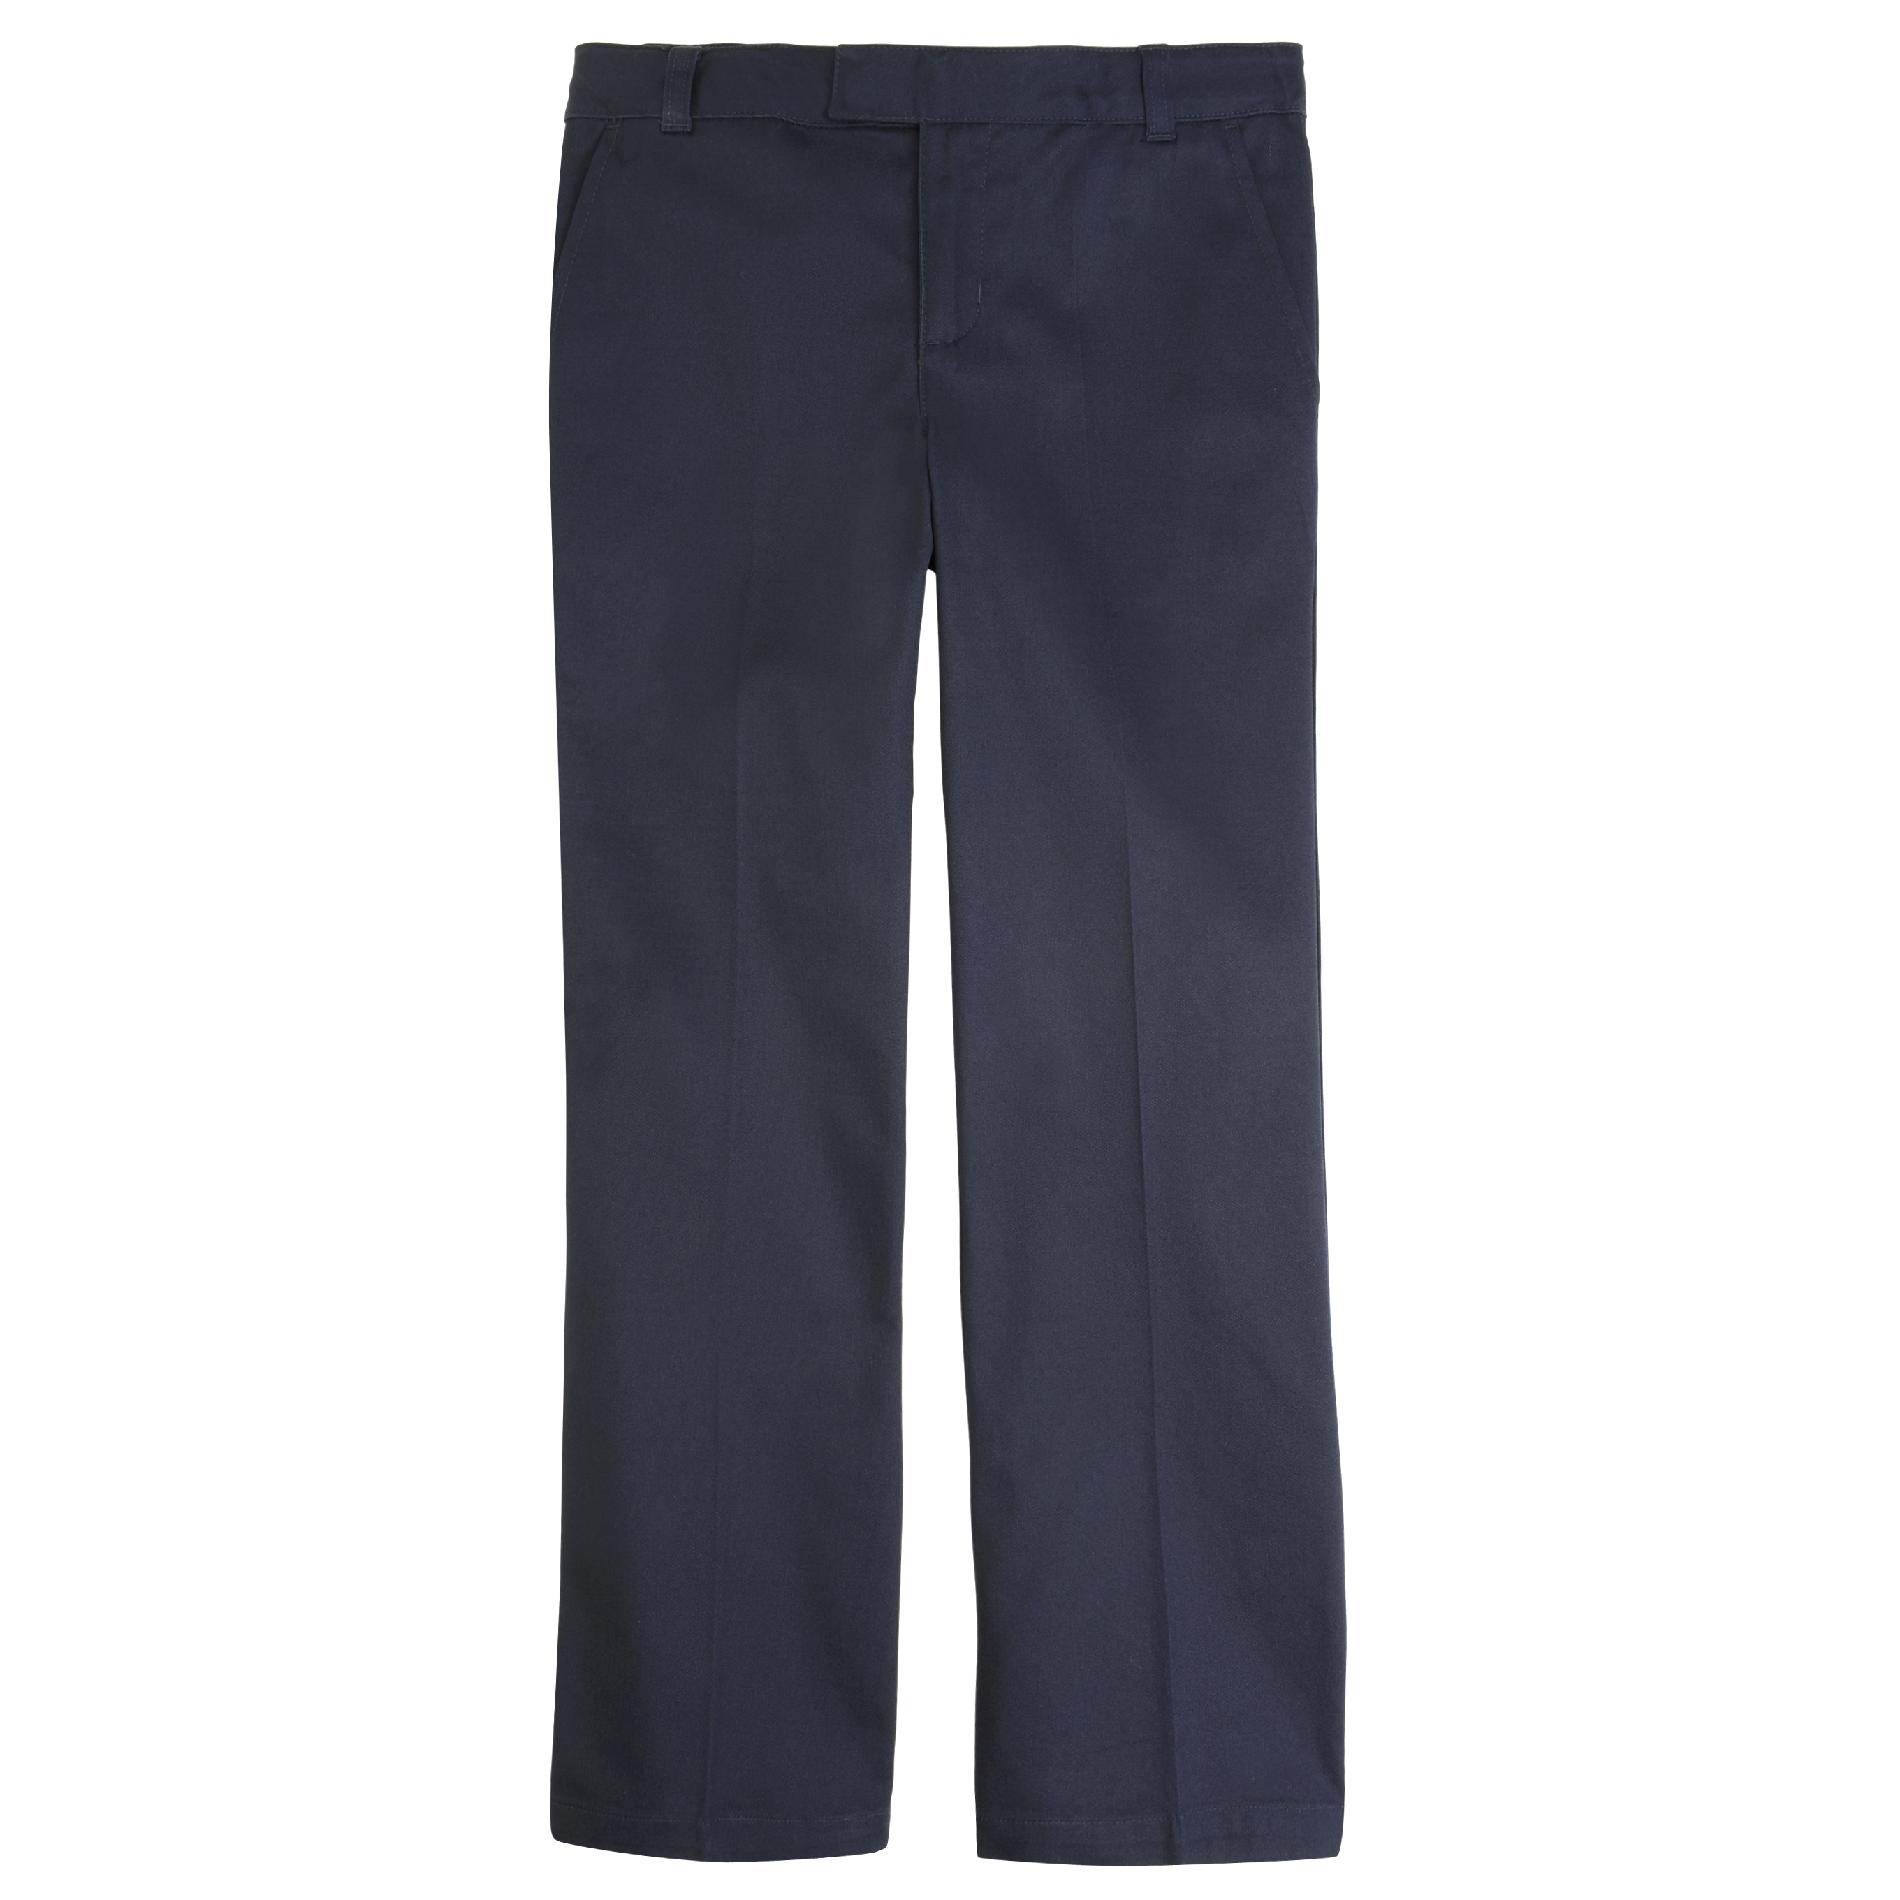 At School by French Toast Girls Plus Adjustable Waist Flat-Front Pant